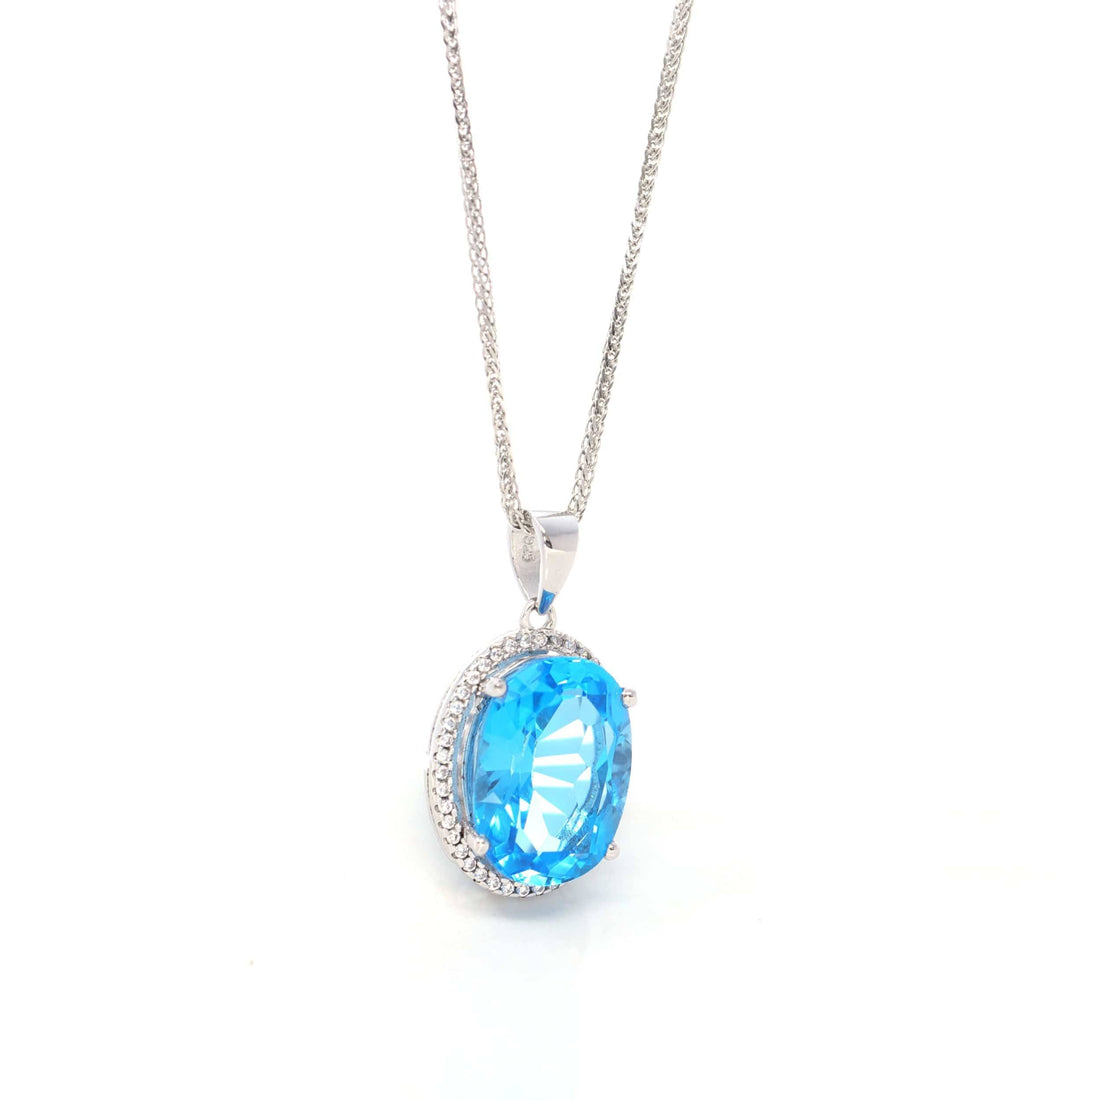 Baikalla Jewelry Silver Topaz Necklace Sterling Silver Natural Topaz Large Pendant Necklace With CZ